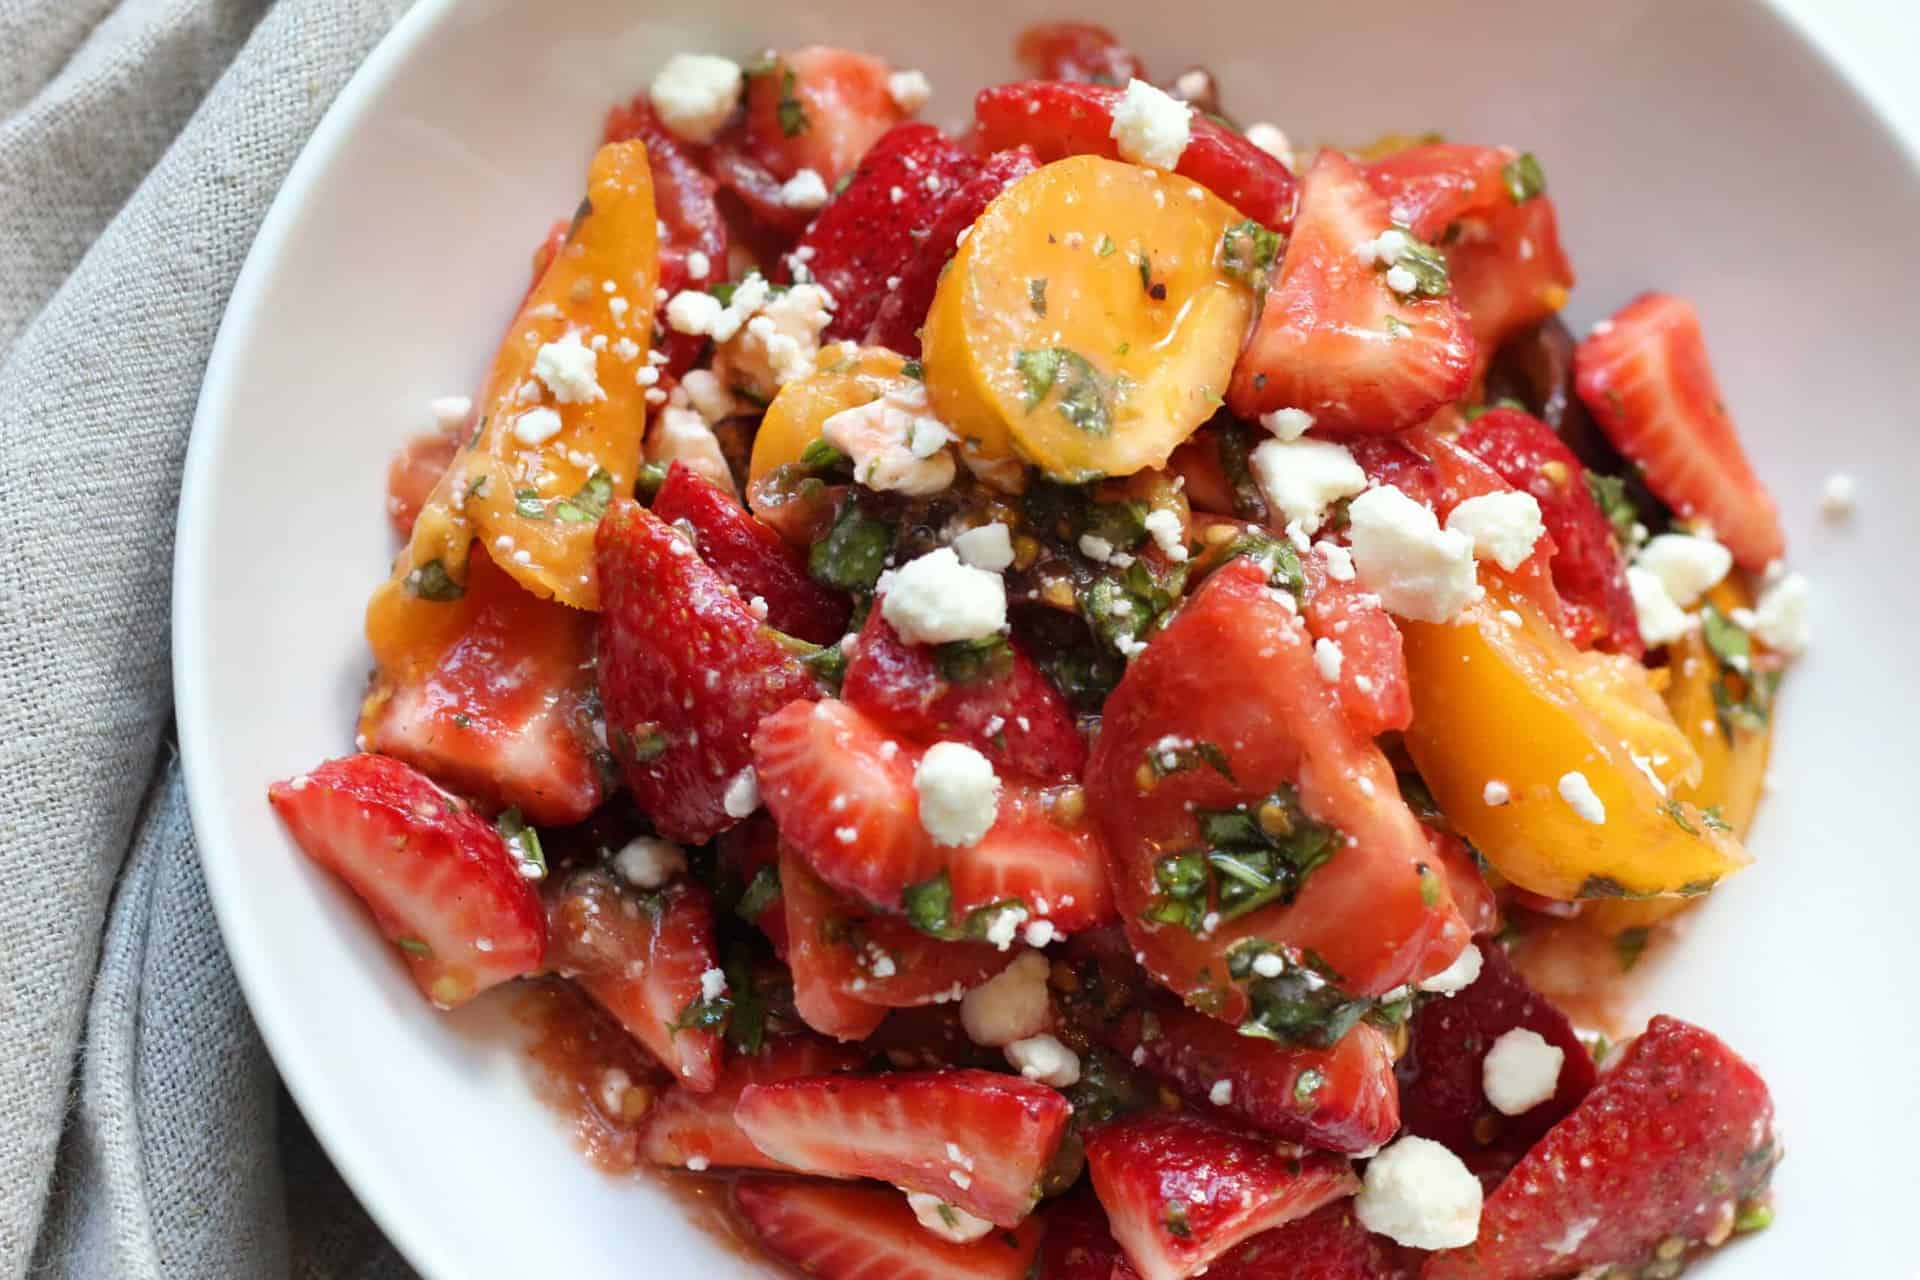 Heirloom Tomatoes and Strawberry Salad